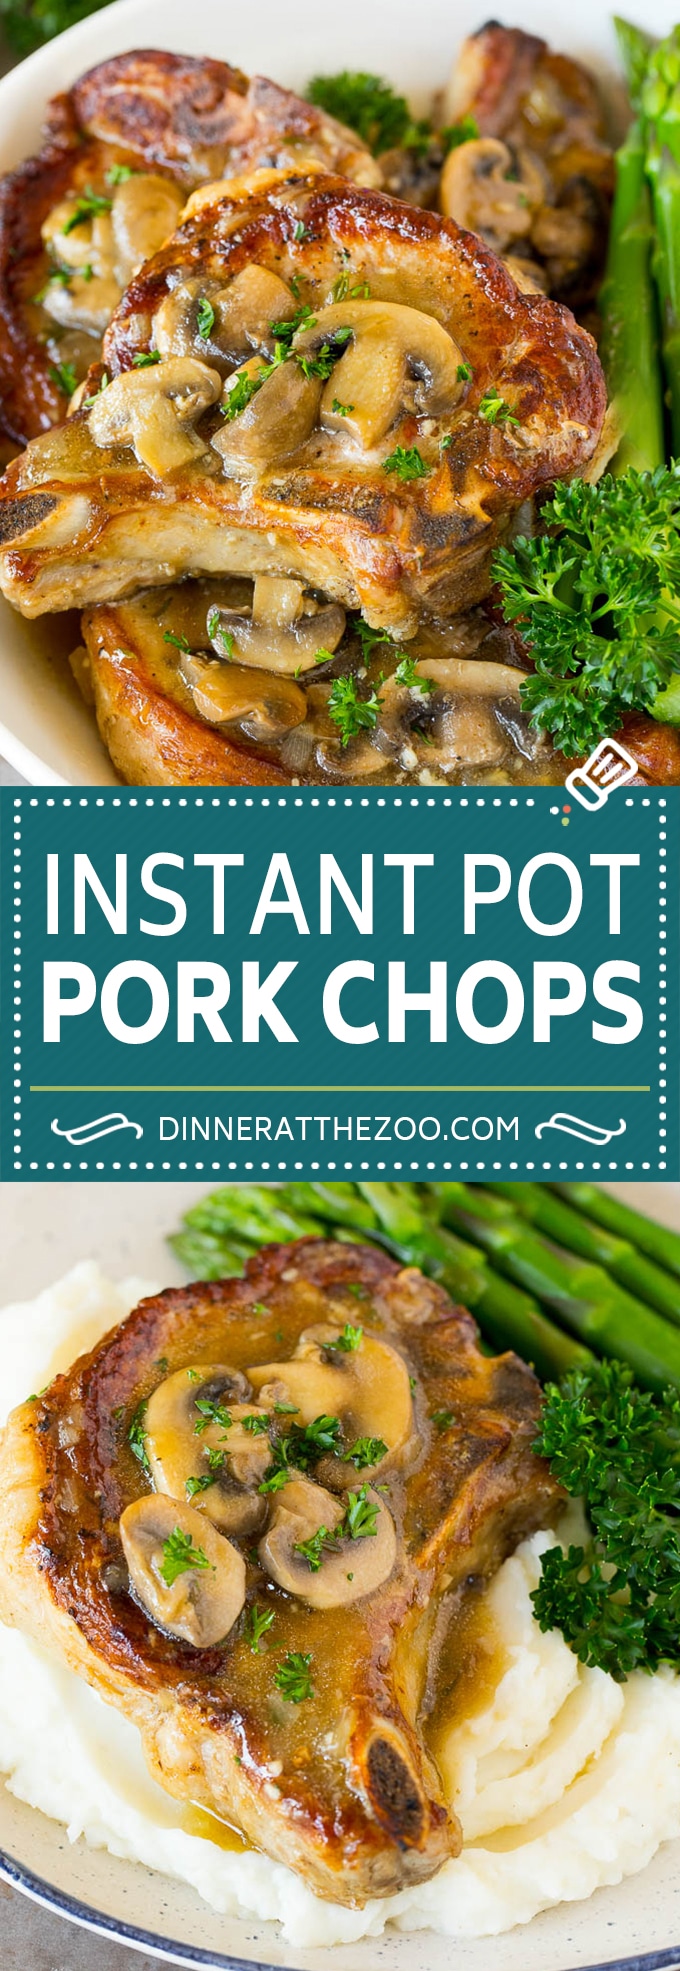 These Instant Pot pork chops are seared to golden brown perfection, then pressure cooked and covered in mushroom gravy.